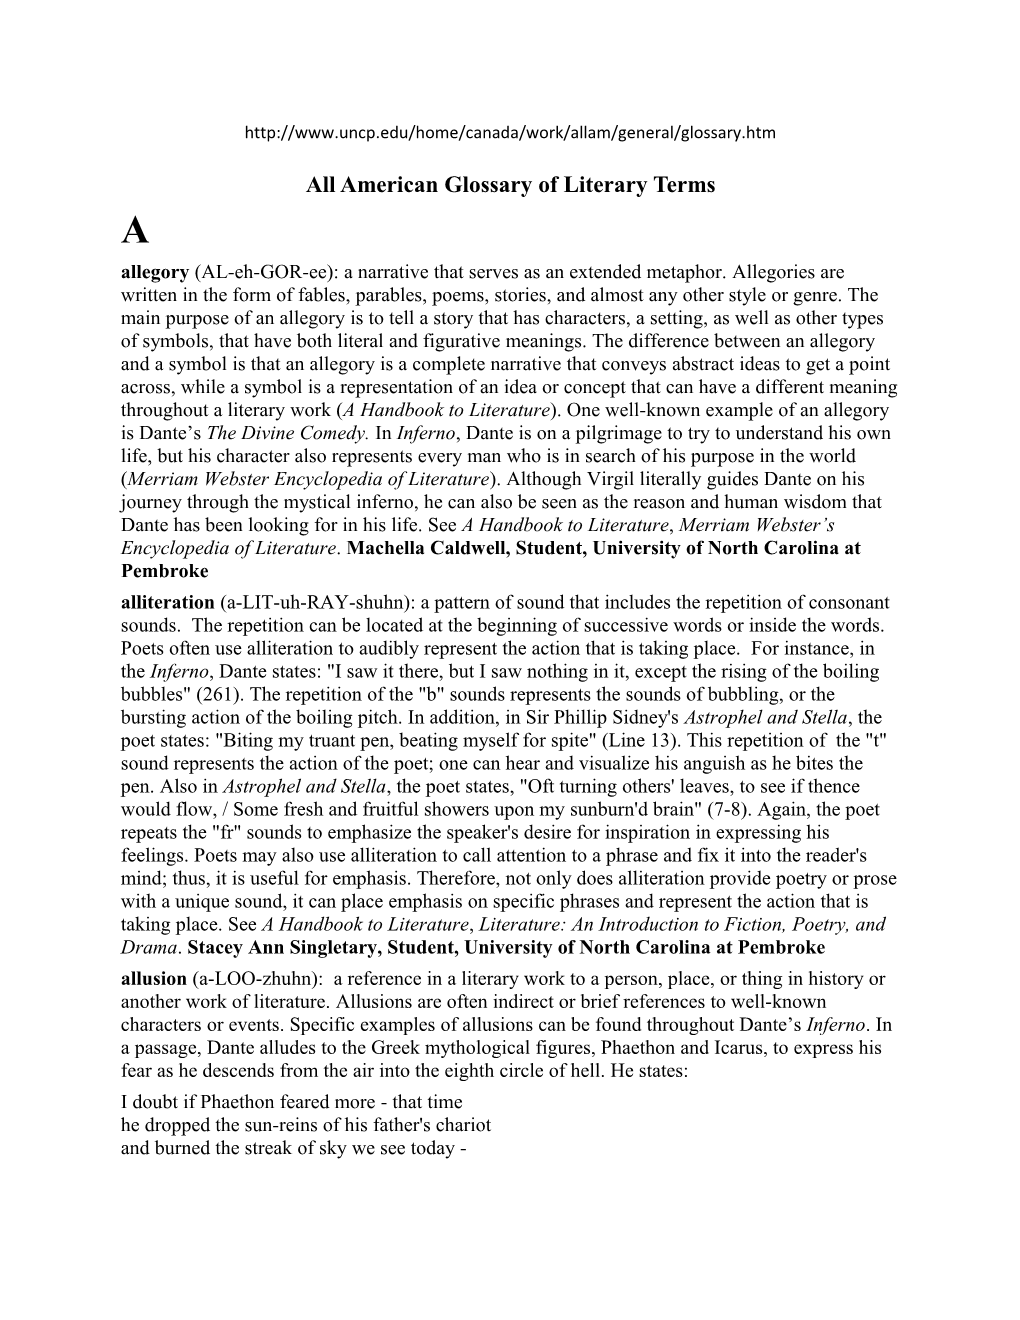 All American Glossary of Literary Terms